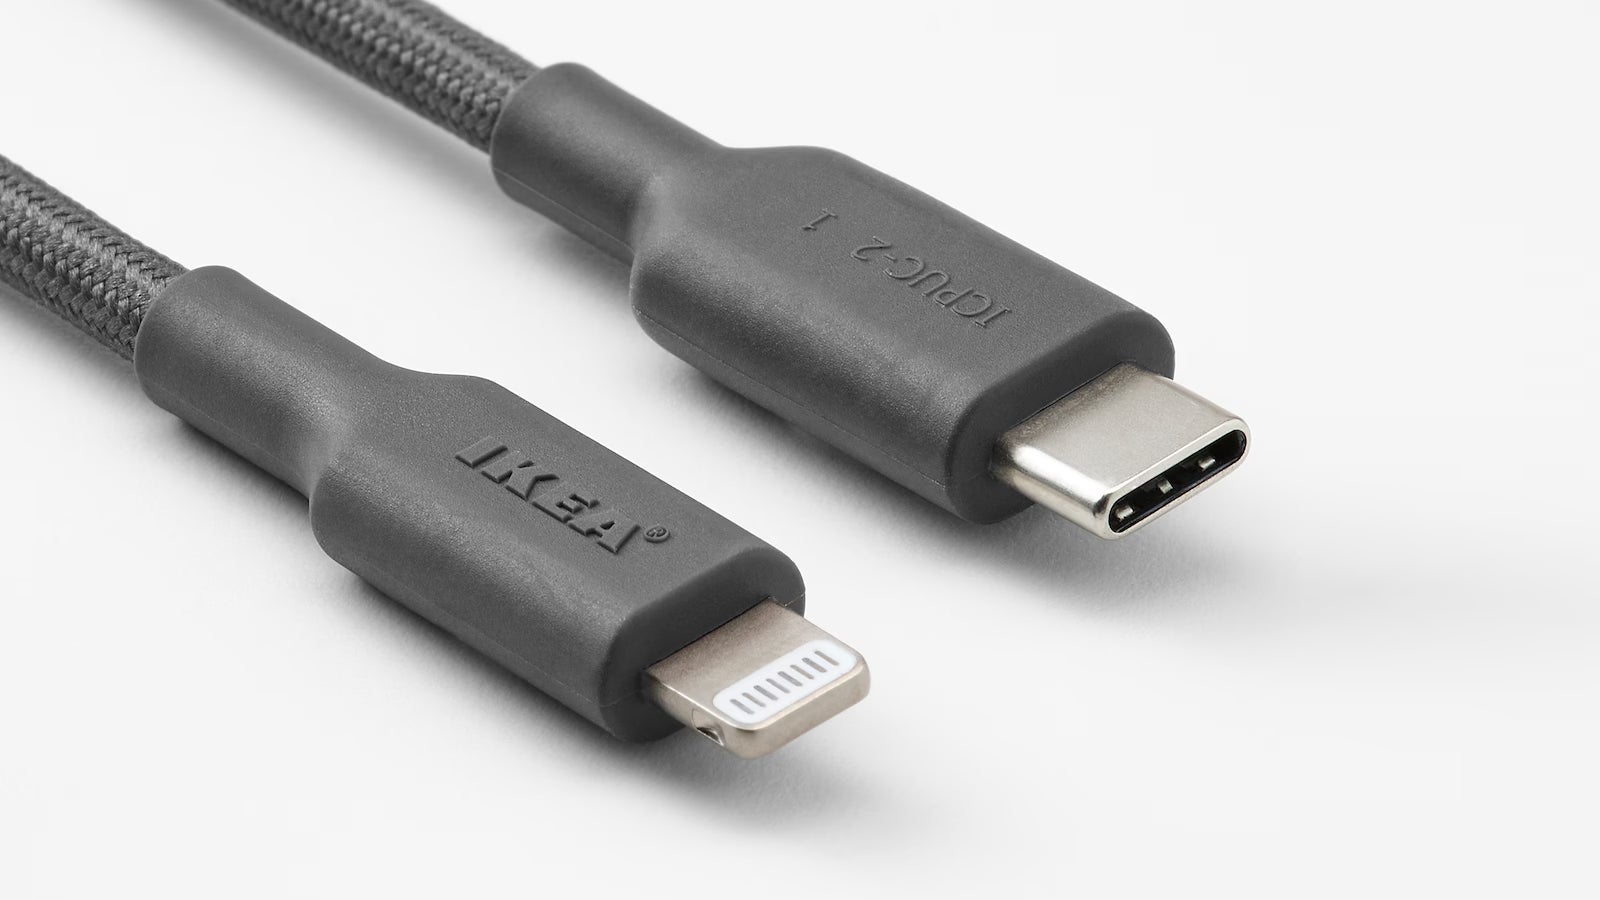 The Lightning cable and USB-C.